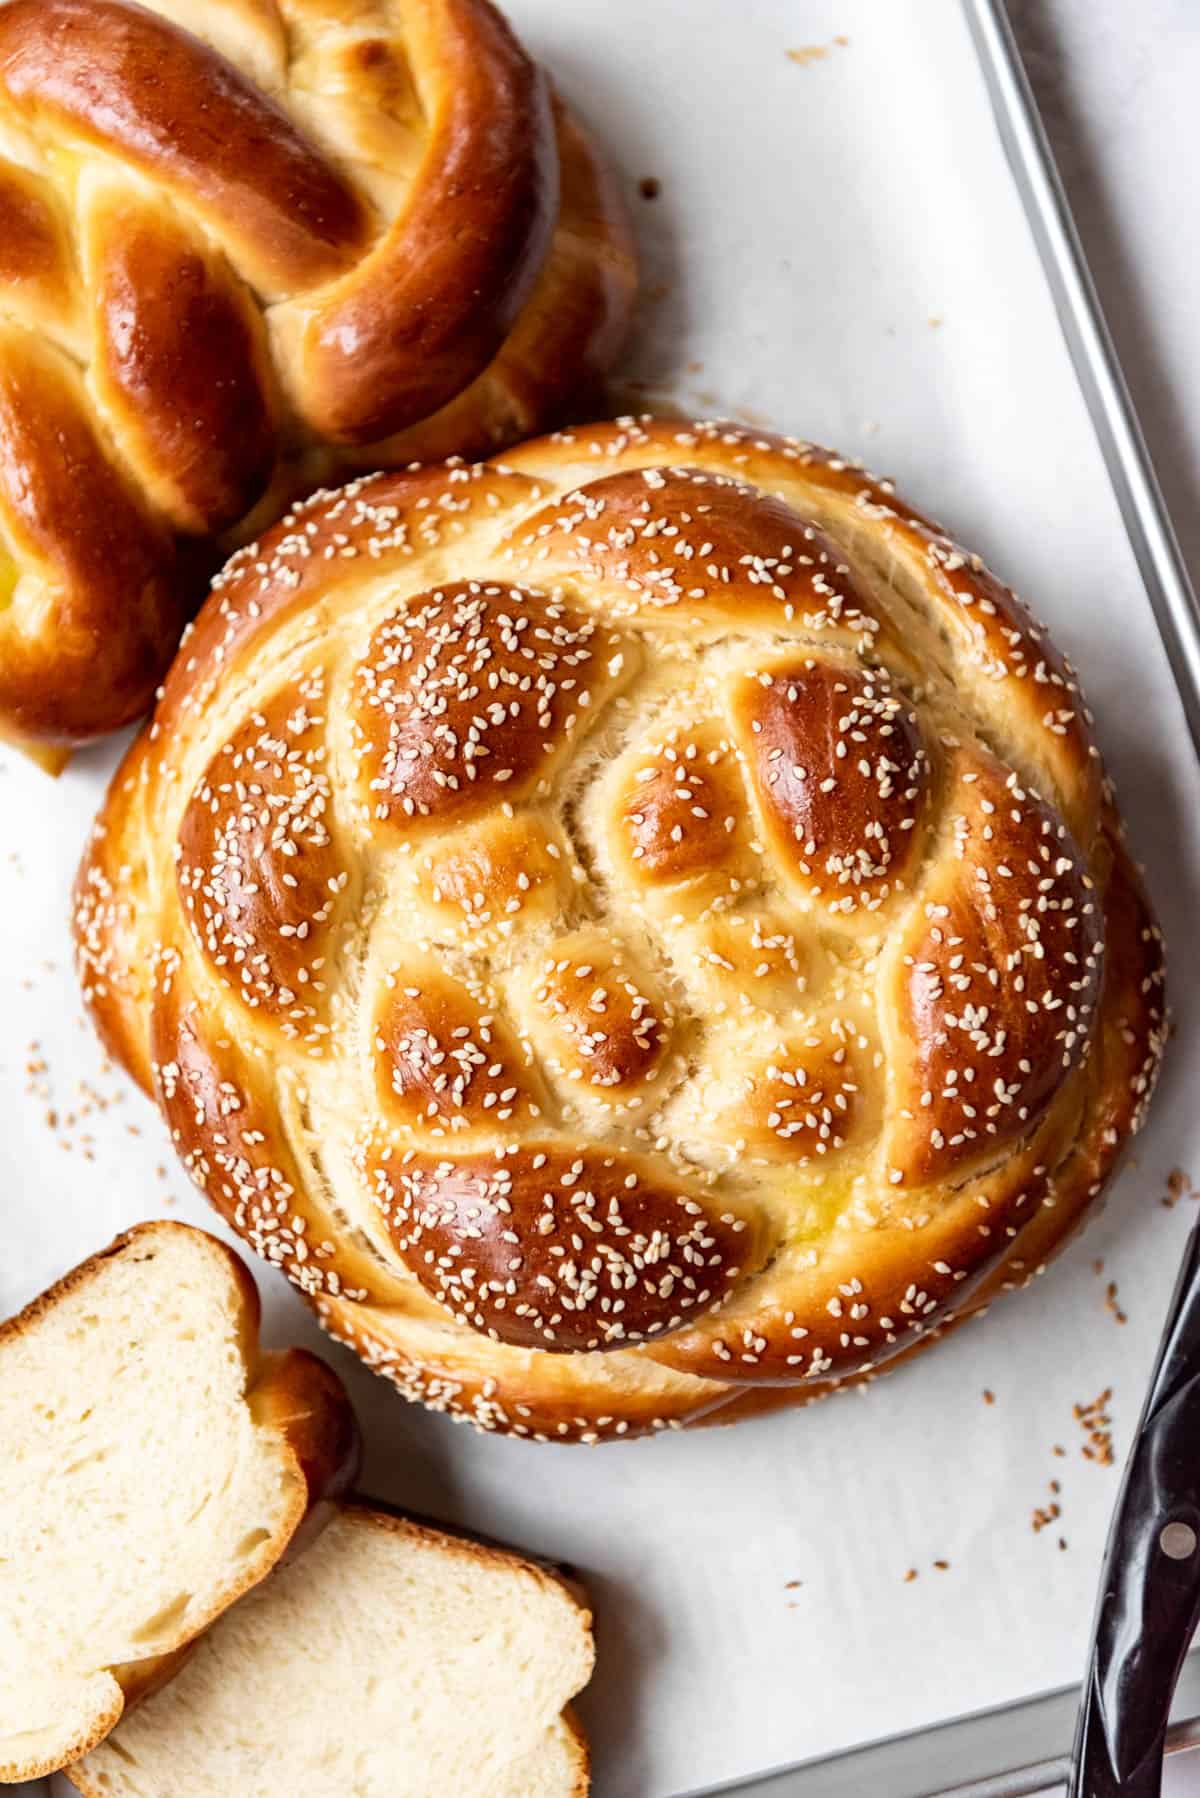 An overhead image of a braided round challah loaf.